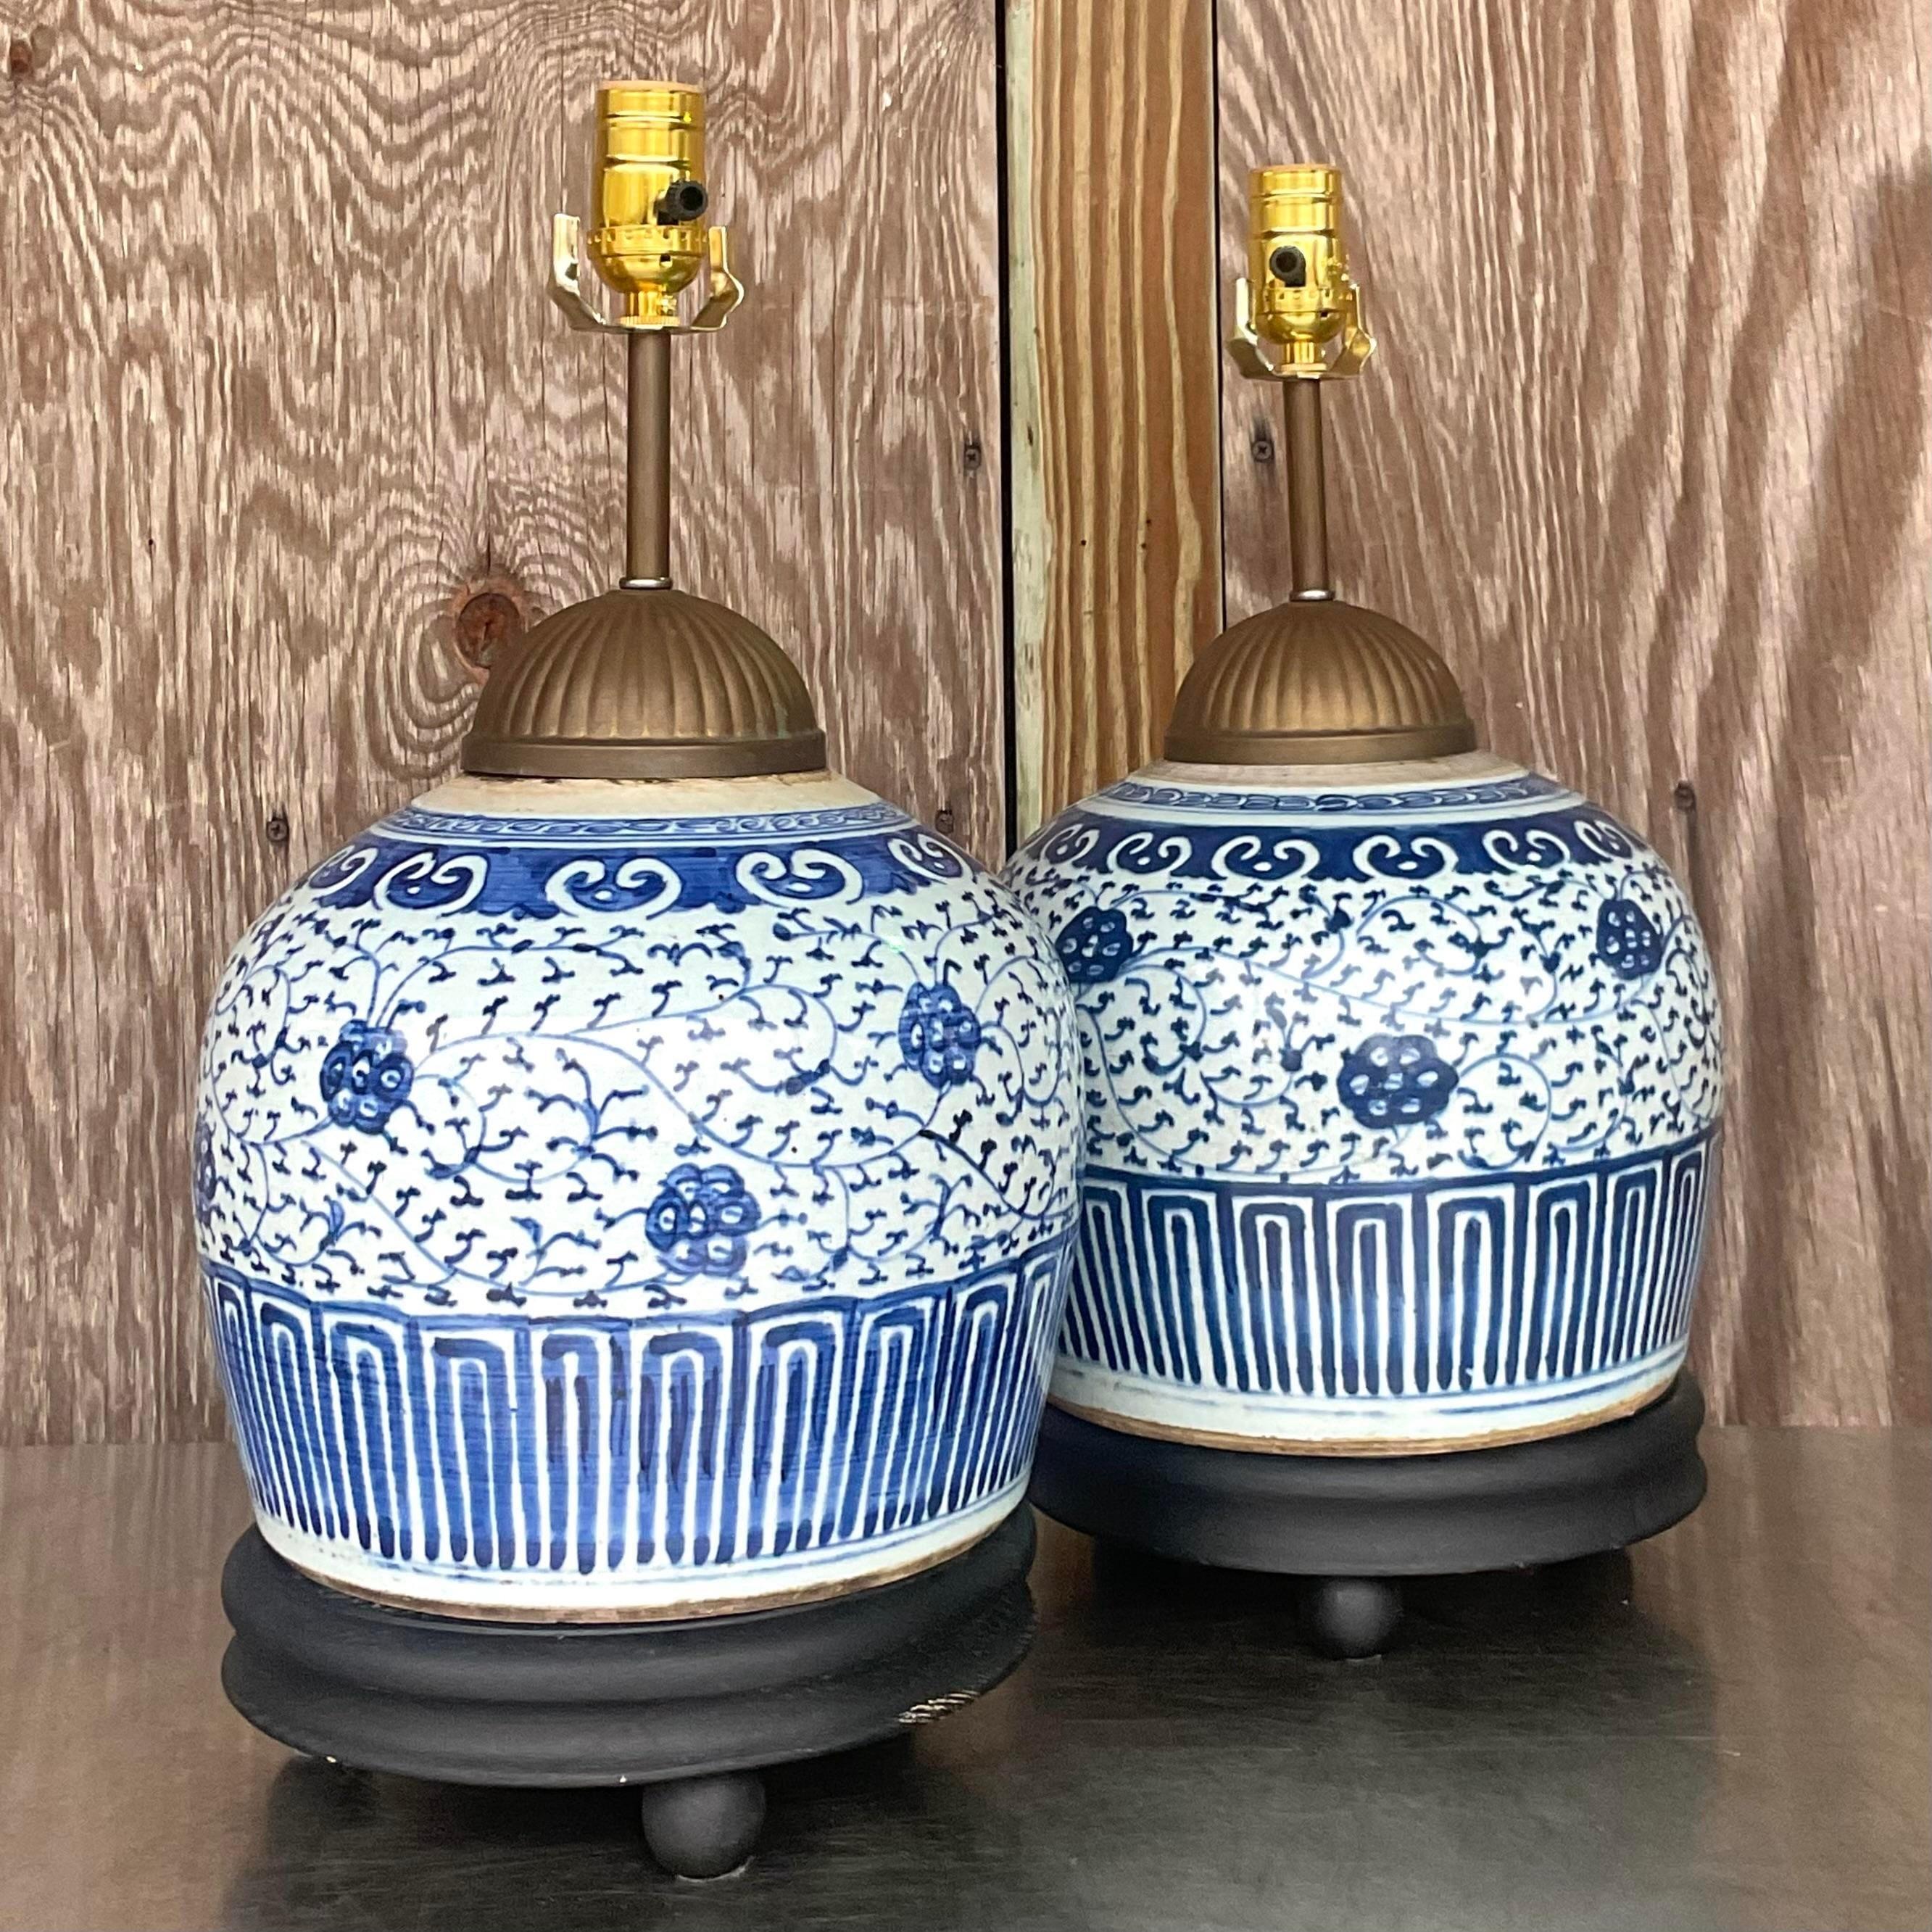 A fabulous pair of vintage Asian table lamps. A classic Gardenia design in thr iconic blue and white. Rests on reclaimed wood plinths. Acquired from a Palm Beach estate.